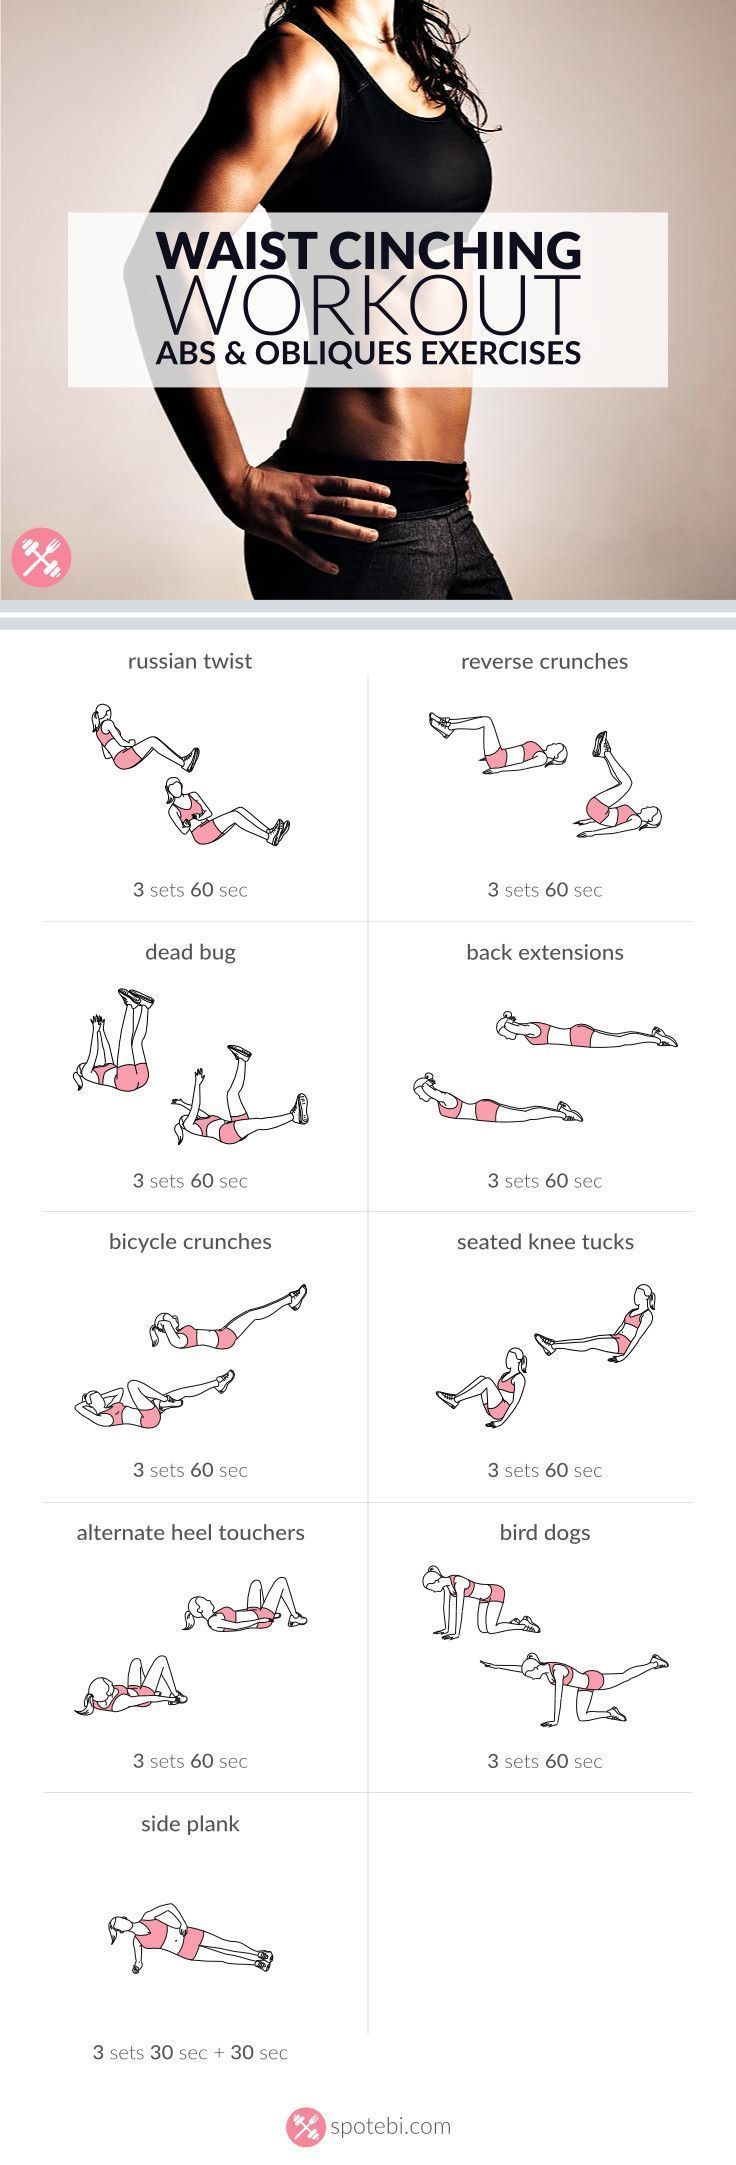 Work on your abs and obliques with these core exercises for women. A 30 minute wai